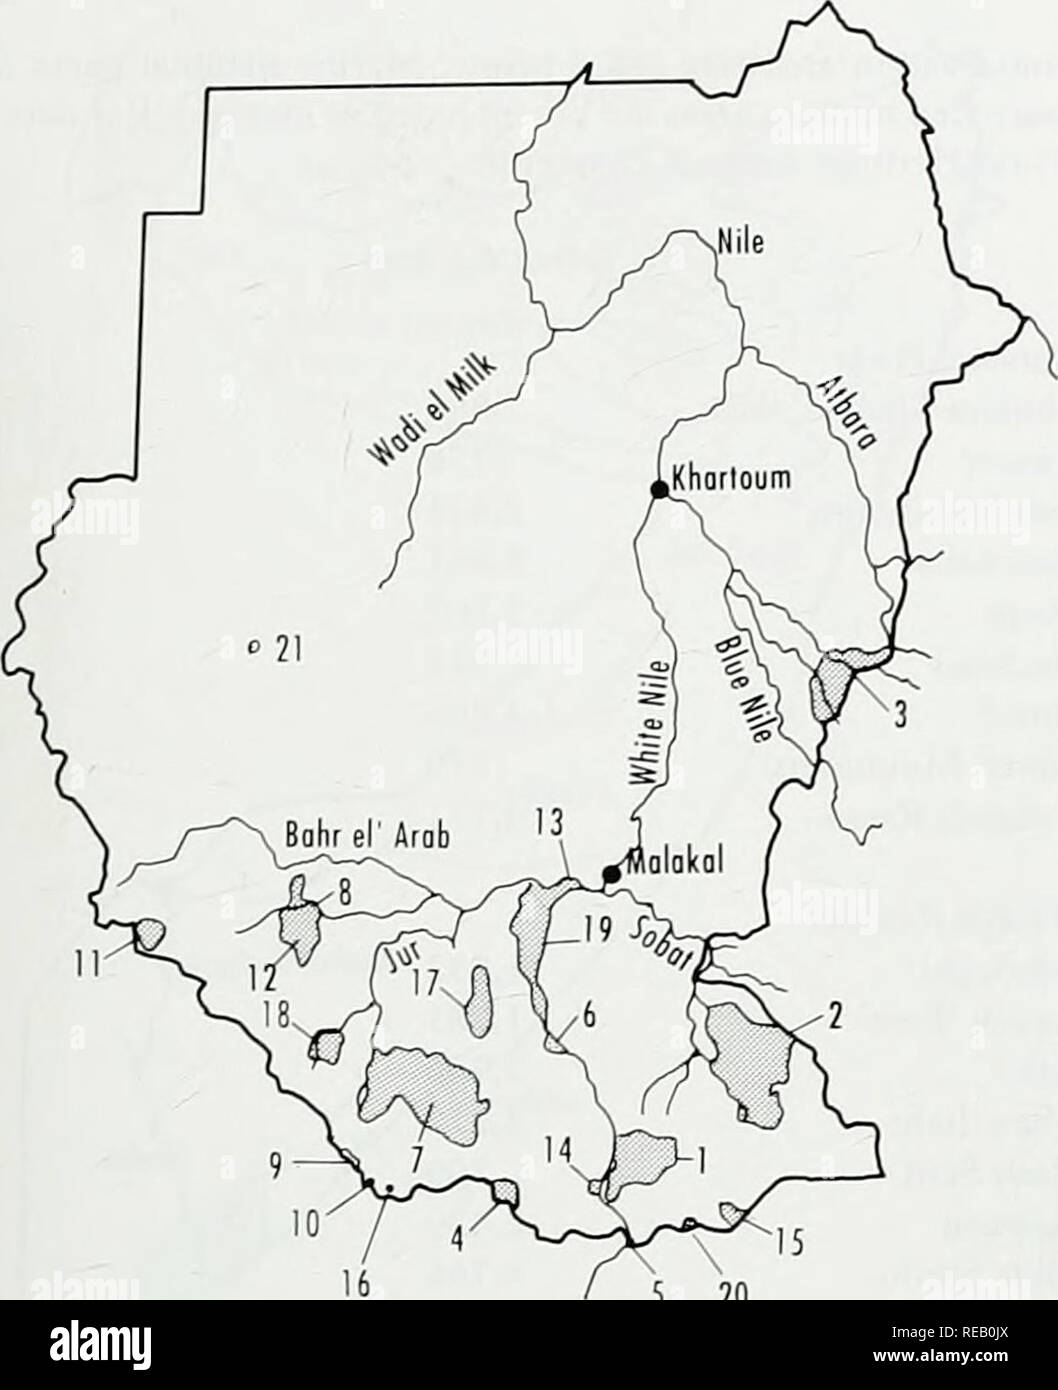 . The Conservation Atlas of Tropical Forests: Africa. Eastern Africa. 5 20 Figure 17.2 Conservation areas of Sudan (.Source: Hillman, 1985) albidwii, Erythrophlewn, Entandrophragina angolense, Holoptelea graitdis, Khaya, Maesopsis emimi and AHiaa are typical canopy species and genera. There are no recent reliable estimates of forest cover in Sudan. The World Bank (1986) gives an overall forest area estimate of 940,000 sq. km, with 16,200 sq. km of tropical high forest, all in south Equatoria Province. FAO (1988a) estimates a total of 6400 sq. km of closed forest, based on data in FAOAJN'EP (19 Stock Photo